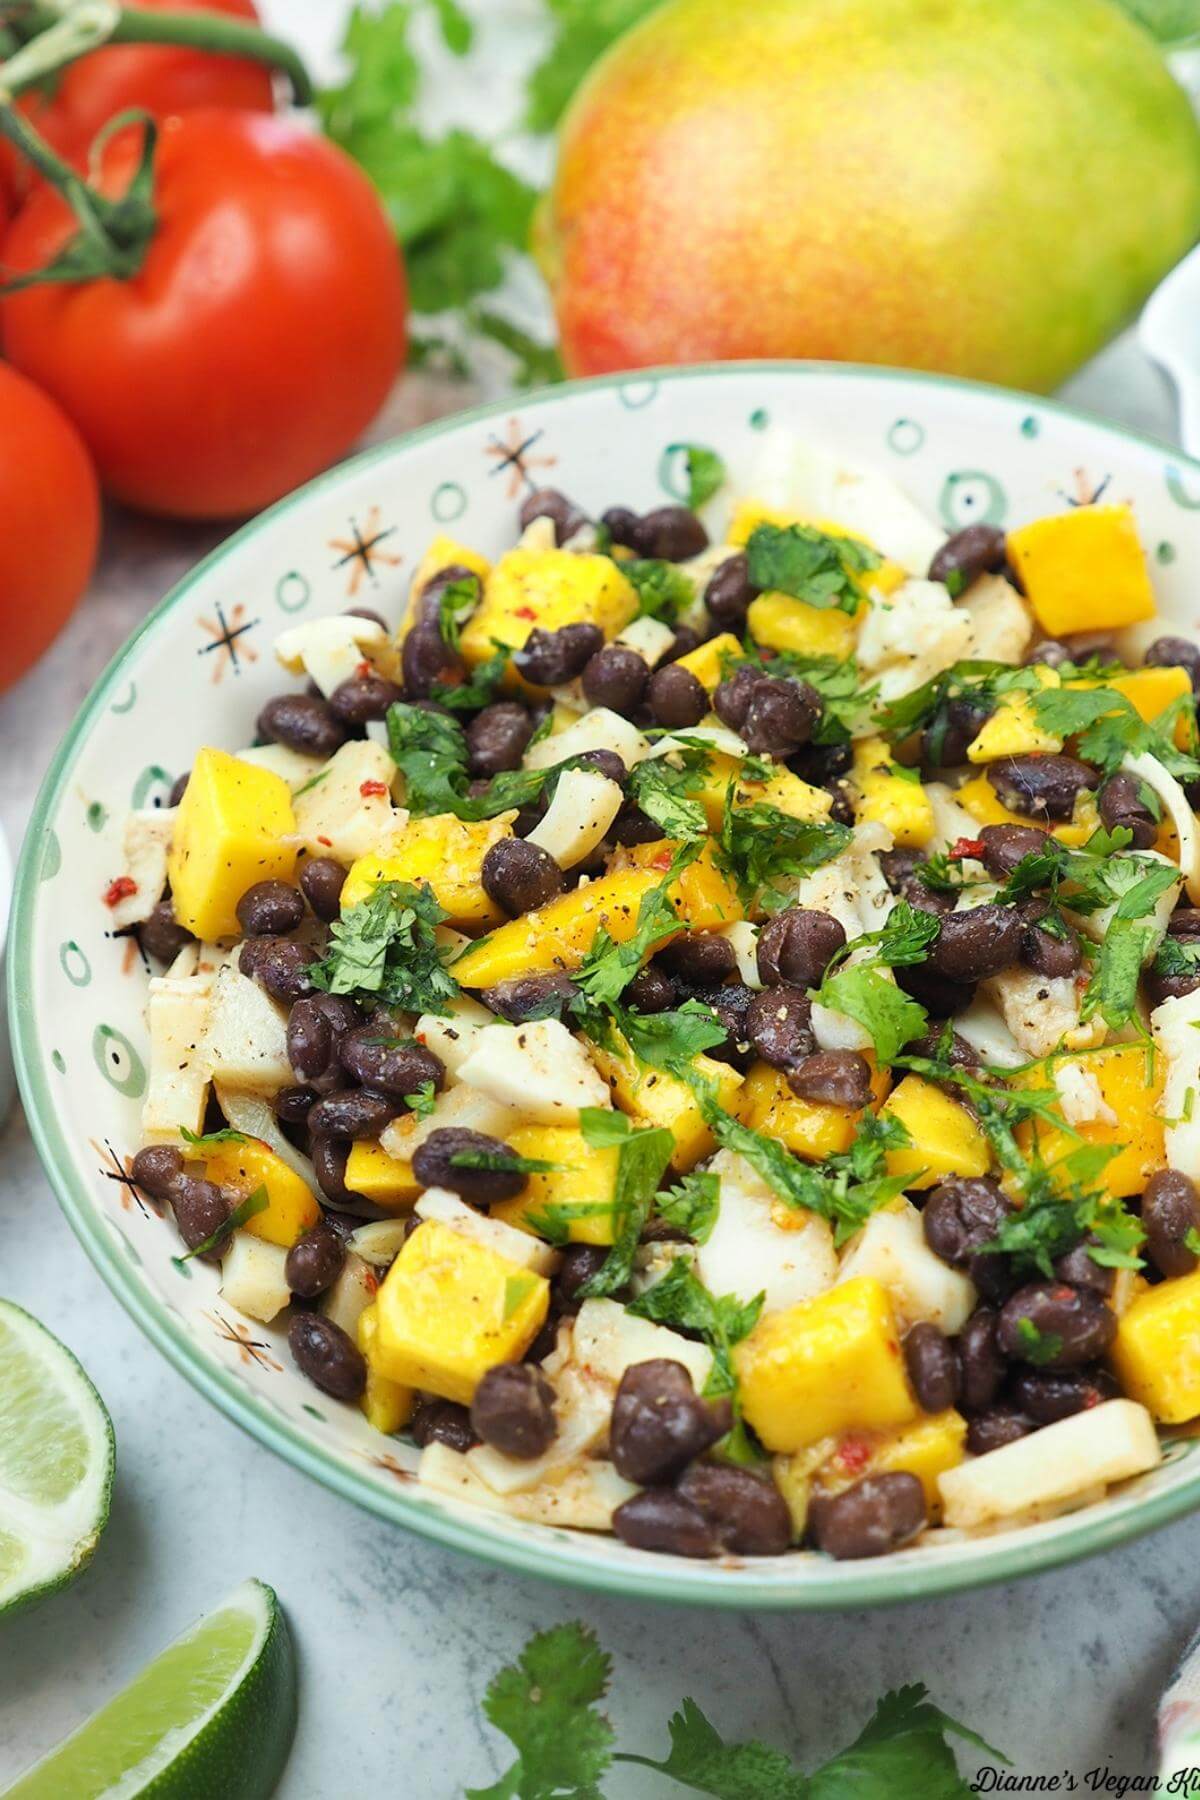 A black bean mango salad in a bowl with tomatoes and mango in the background.